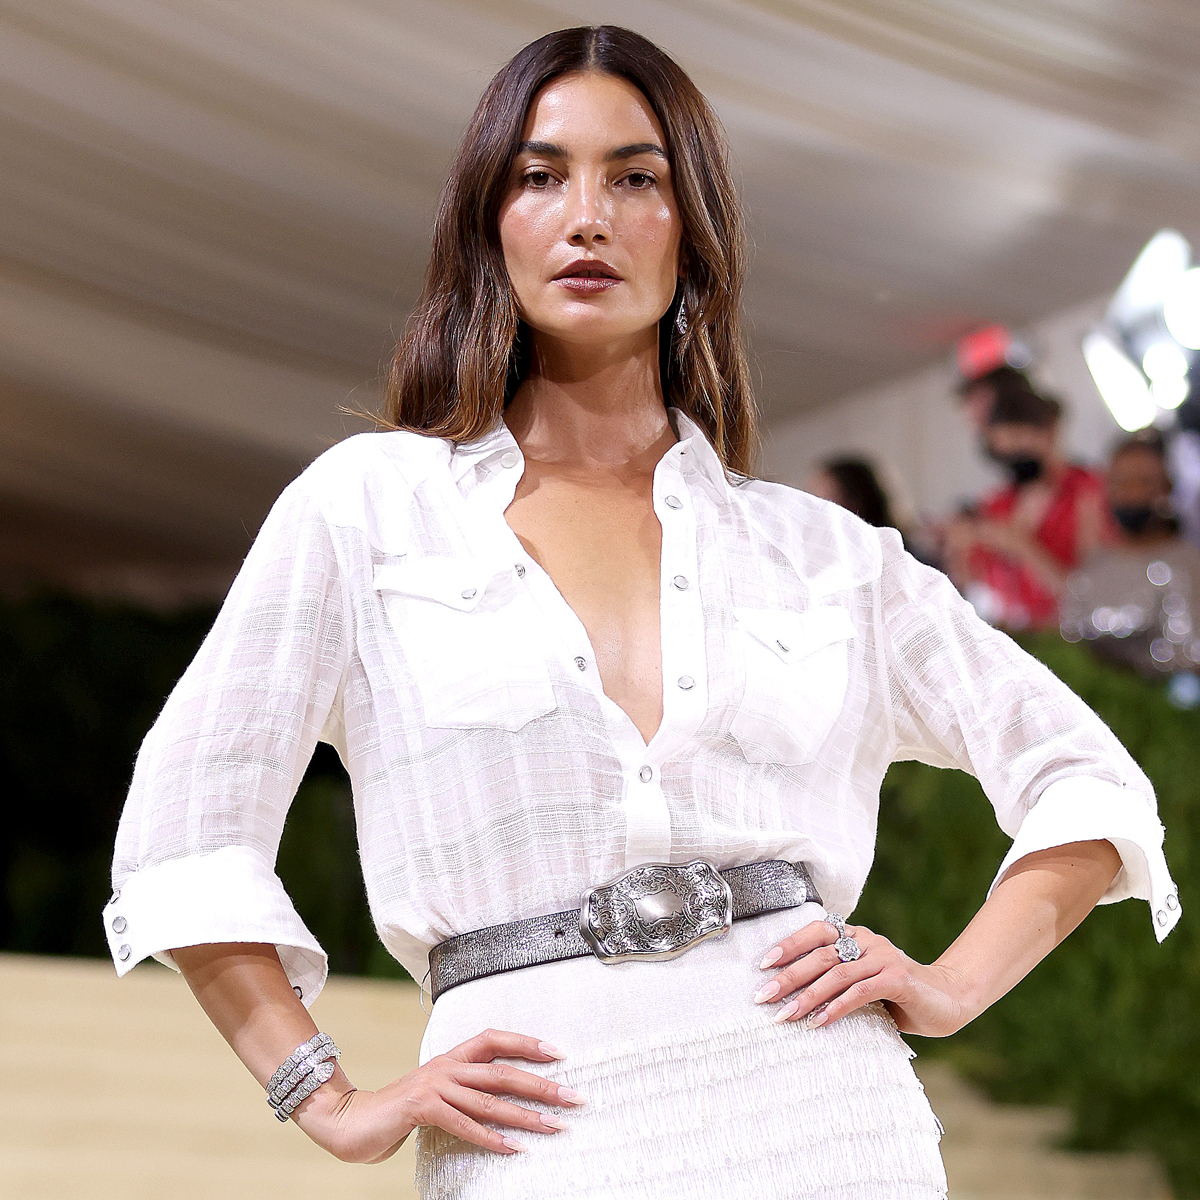 Lily Aldridge News, Pictures, and Videos - E! Online